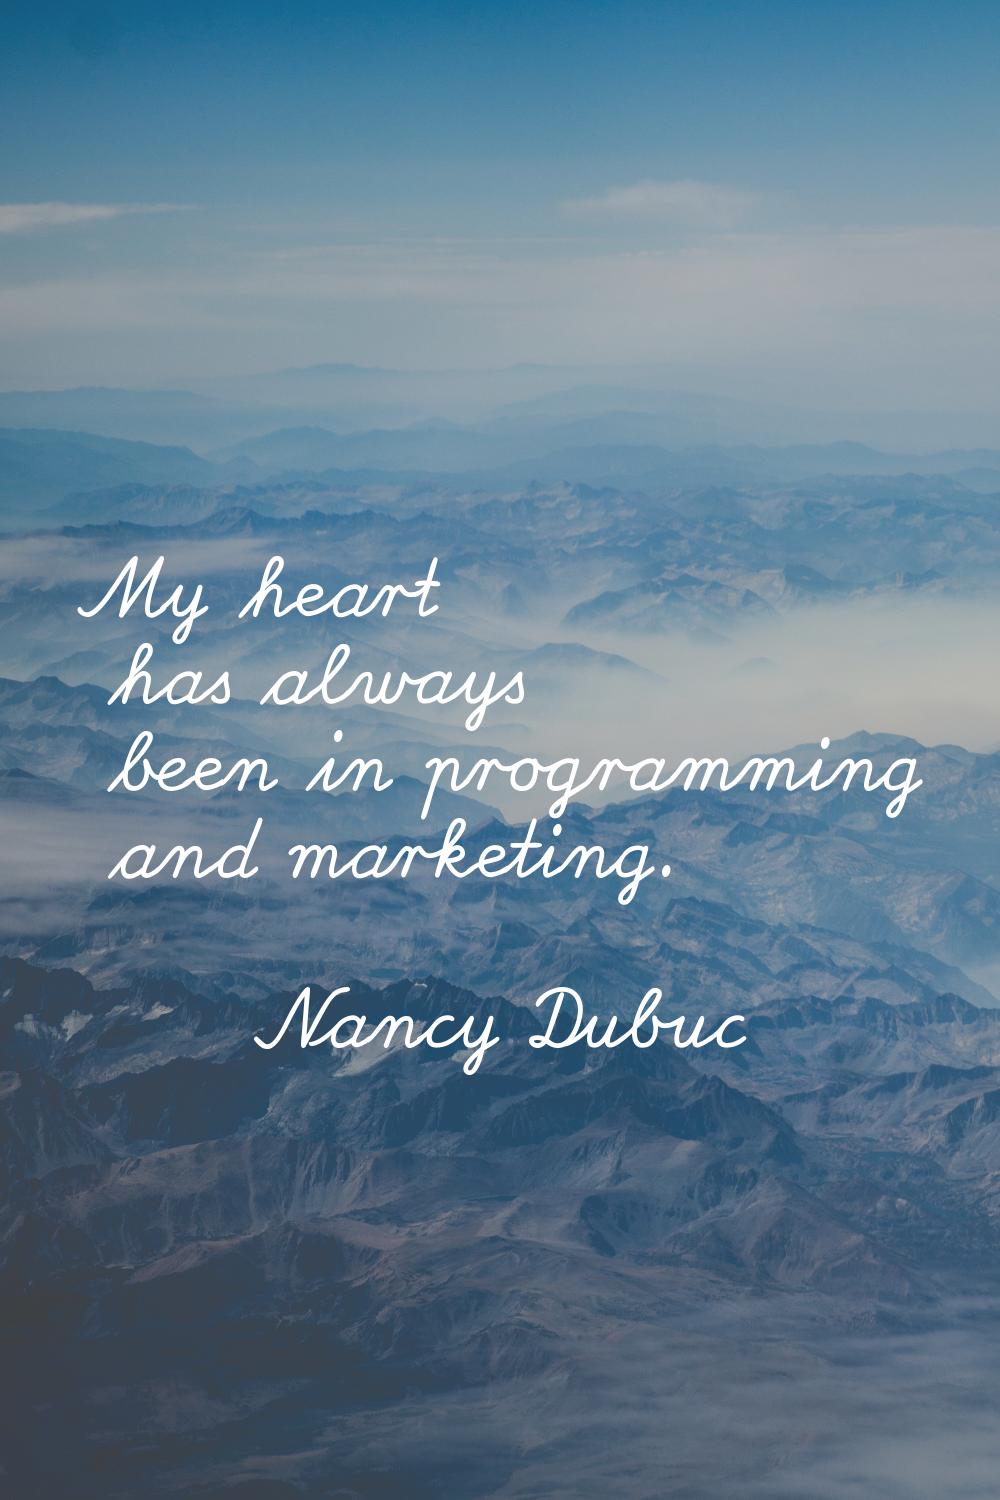 My heart has always been in programming and marketing.